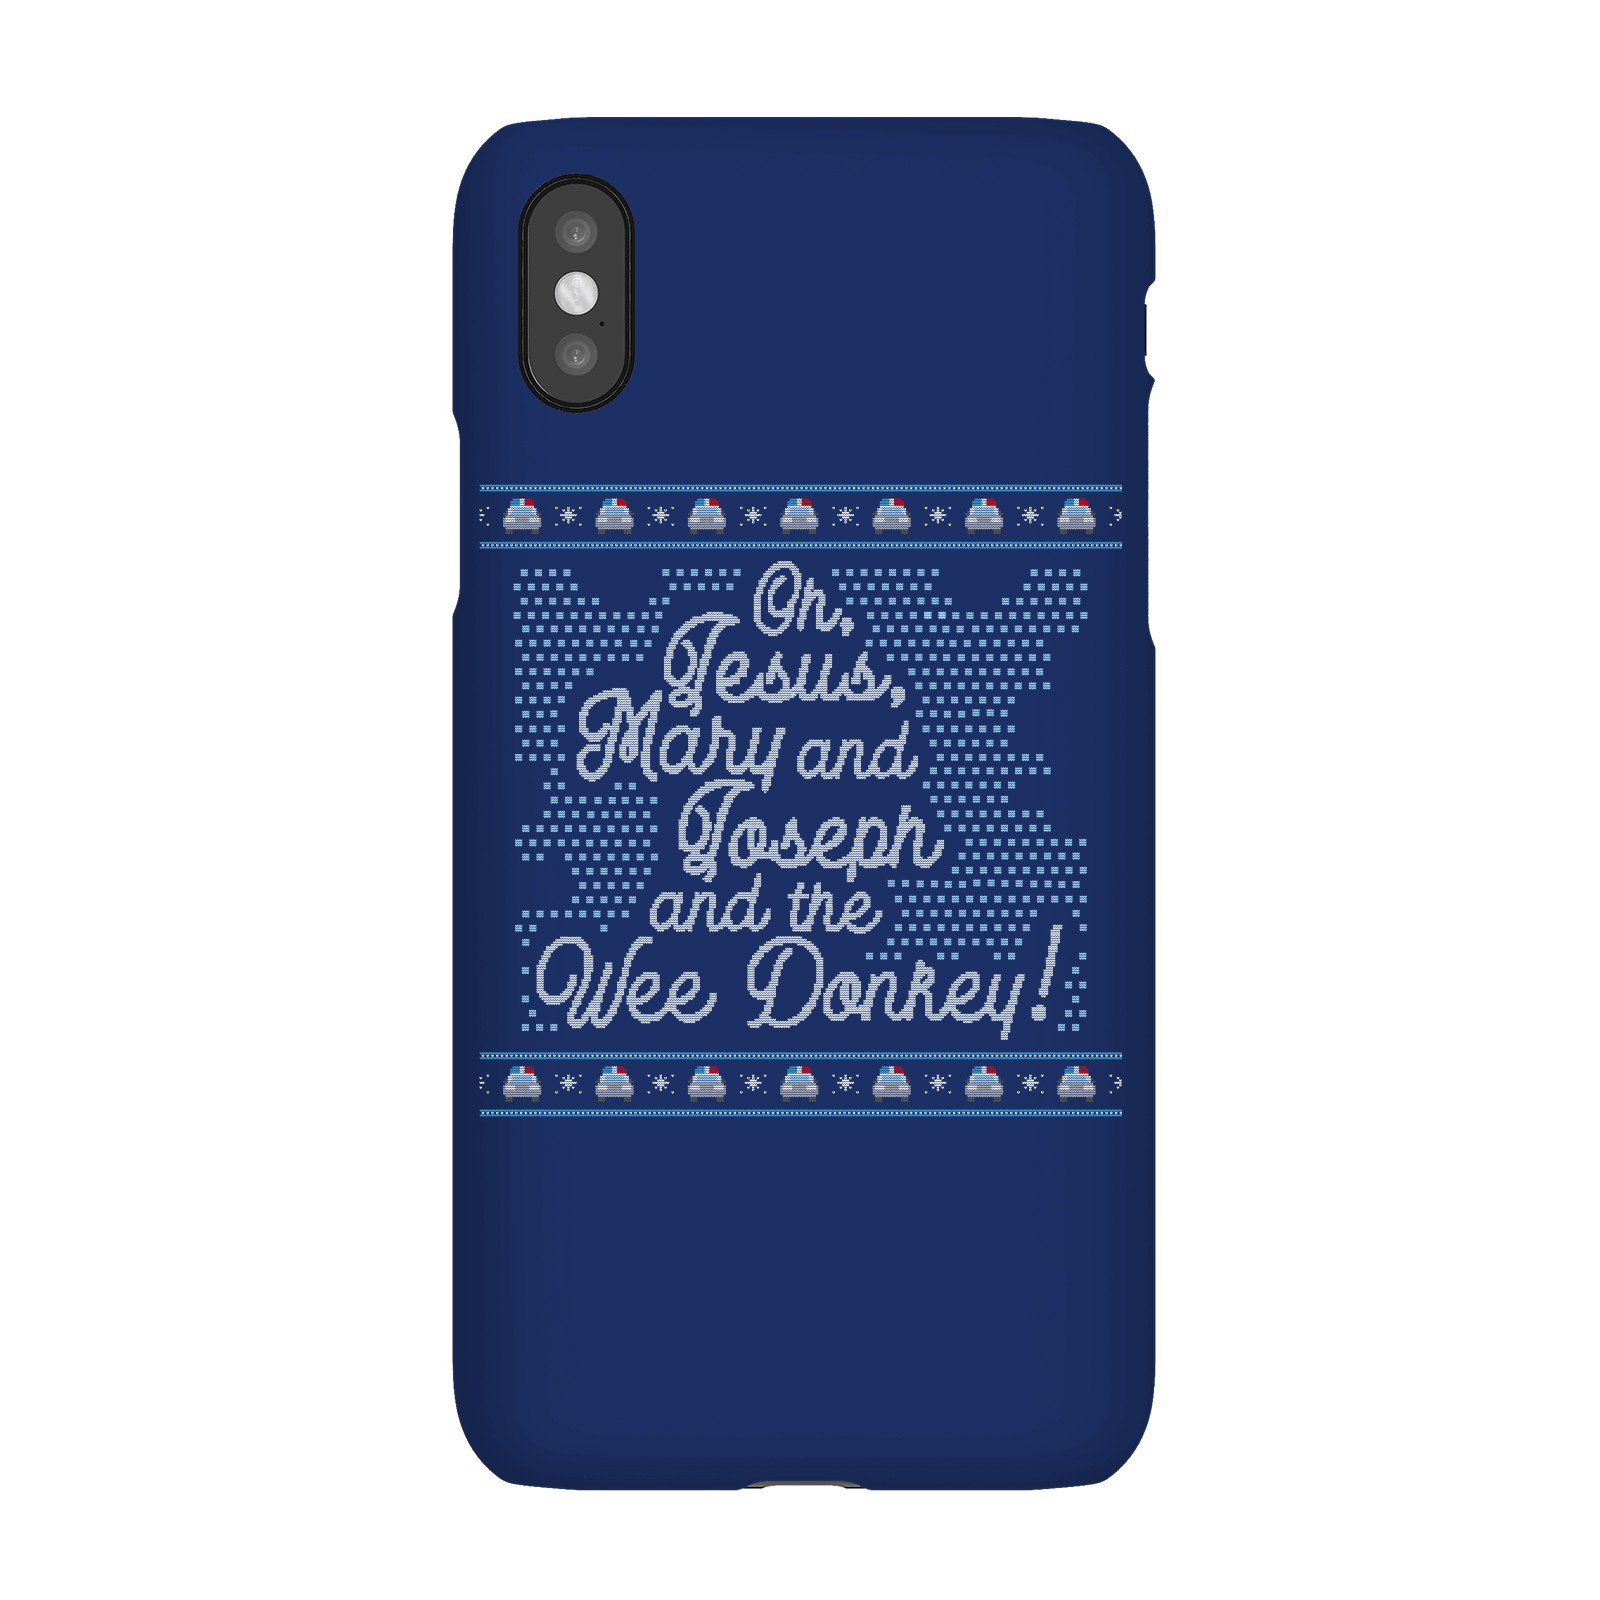 Oh Jesus, Mary And Joseph And The Wee Donkey Phone Case for iPhone and Android - iPhone 5/5s - Snap Case - Matte